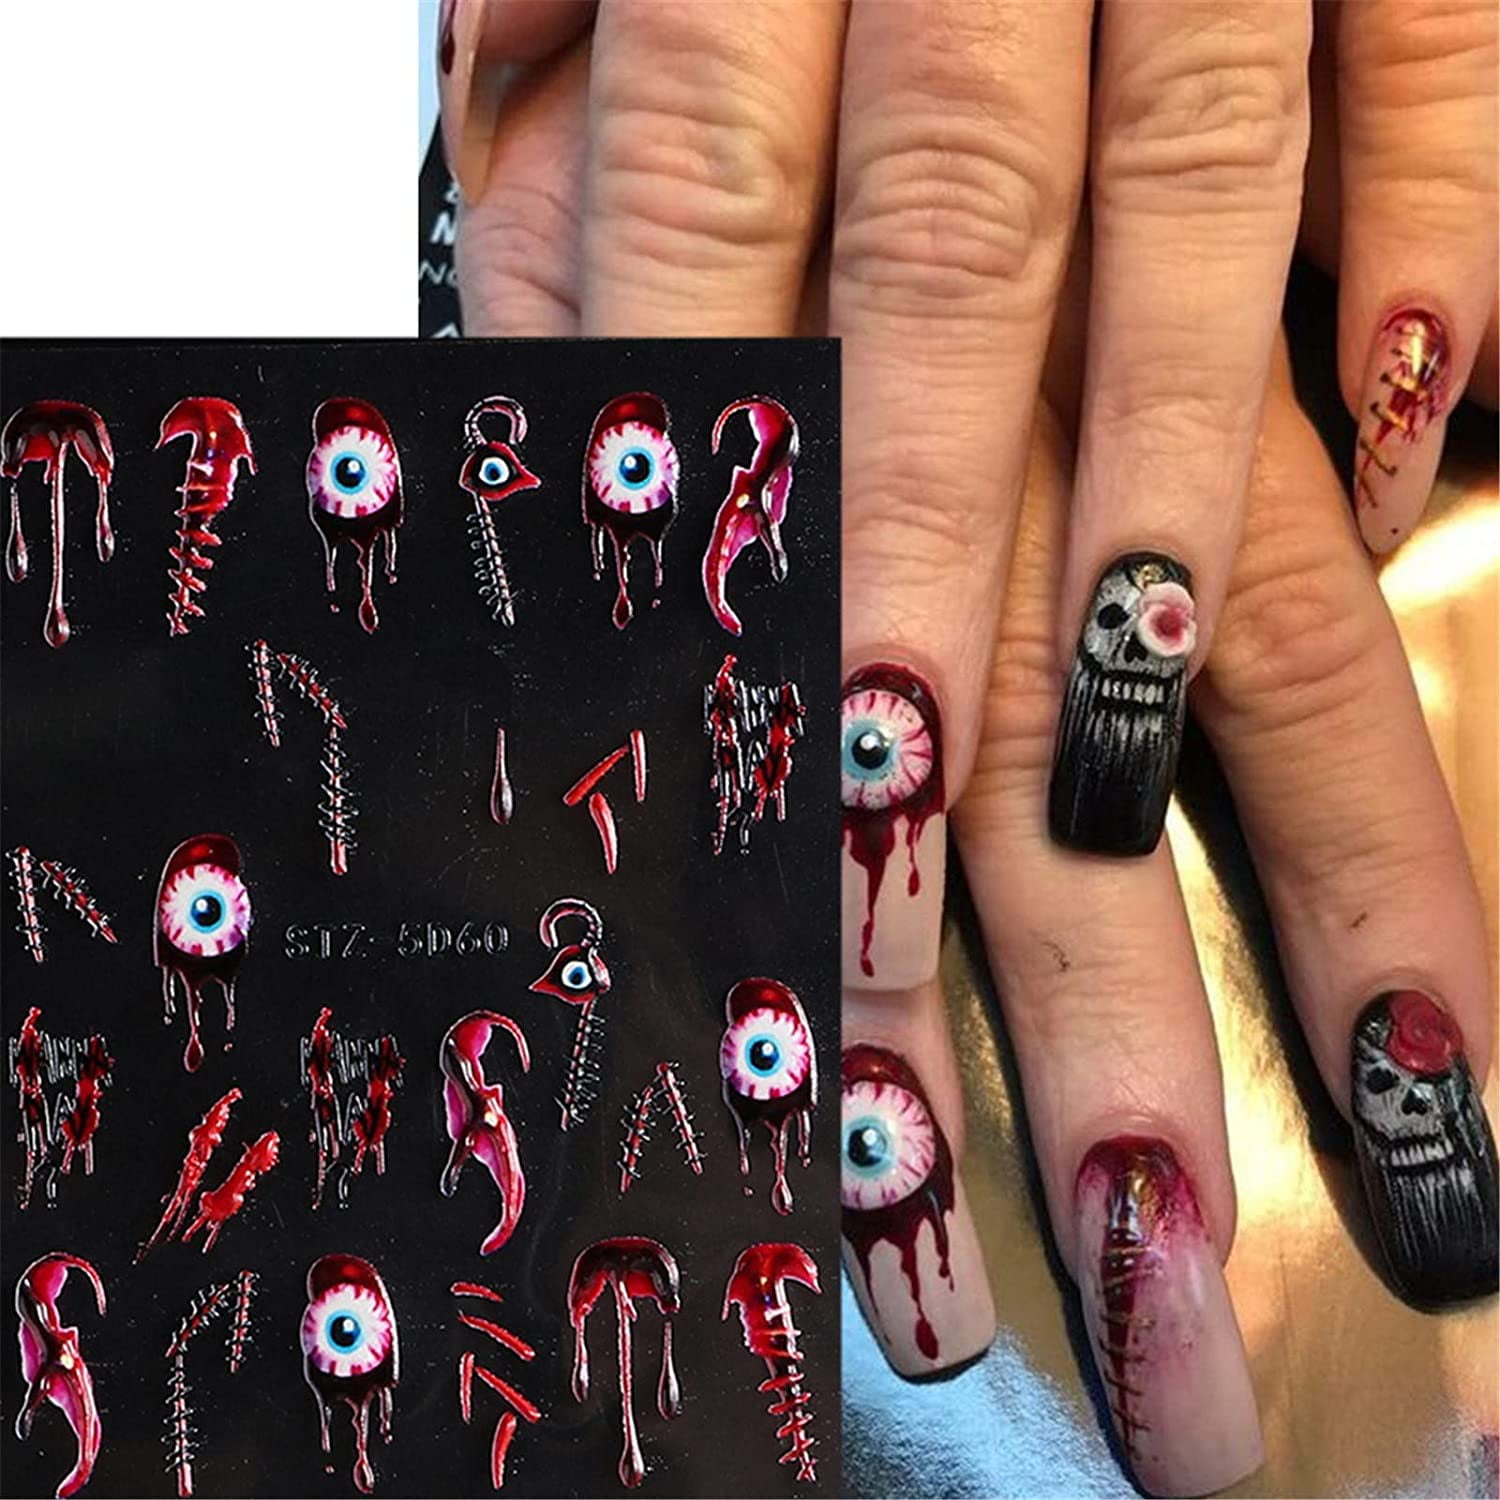 Discover more than 157 halloween nail decals latest